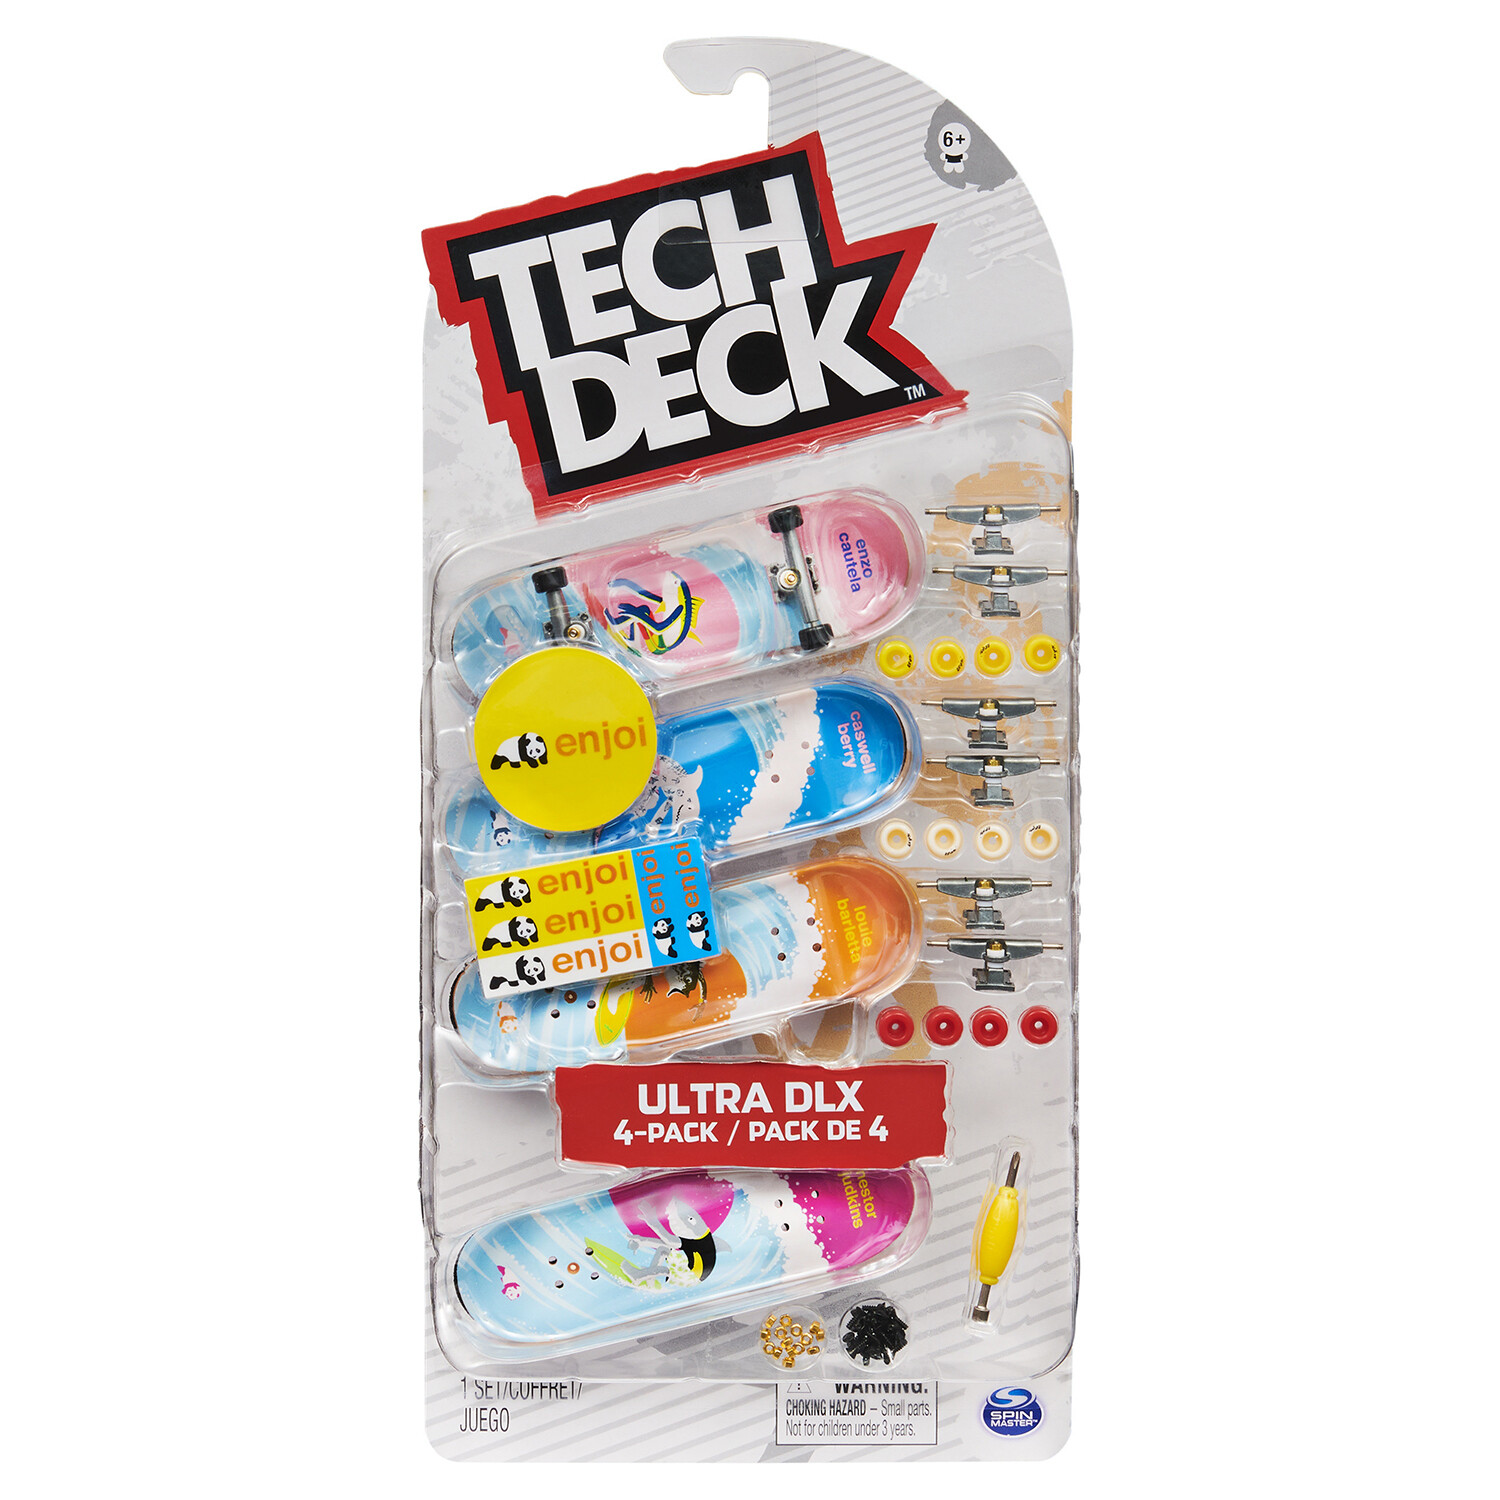 Single Tech Deck Ultra DLX Skateboards Figures 4 Pack in Assorted styles Image 2